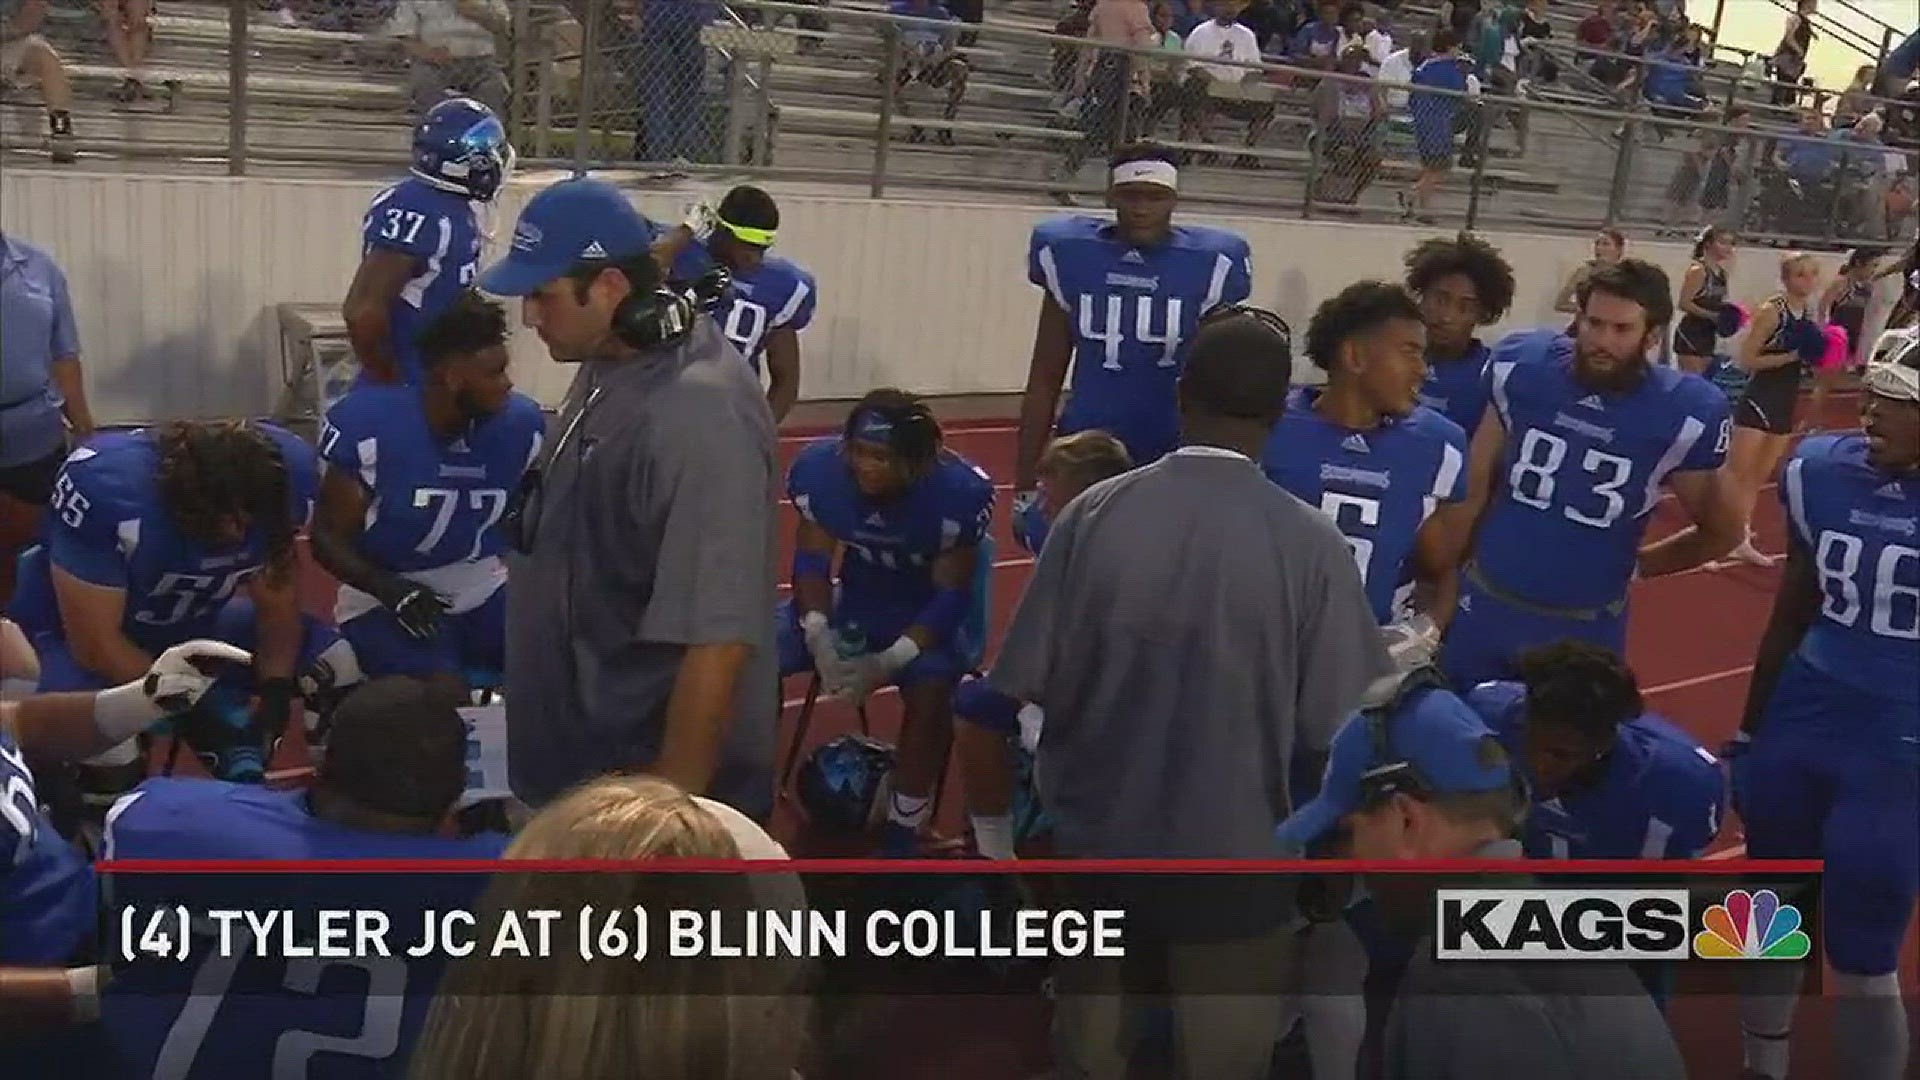 No. 6 Blinn gave up 34 second half points en route to a 34-22 loss to No. 4 Tyler Junior College on Saturday.